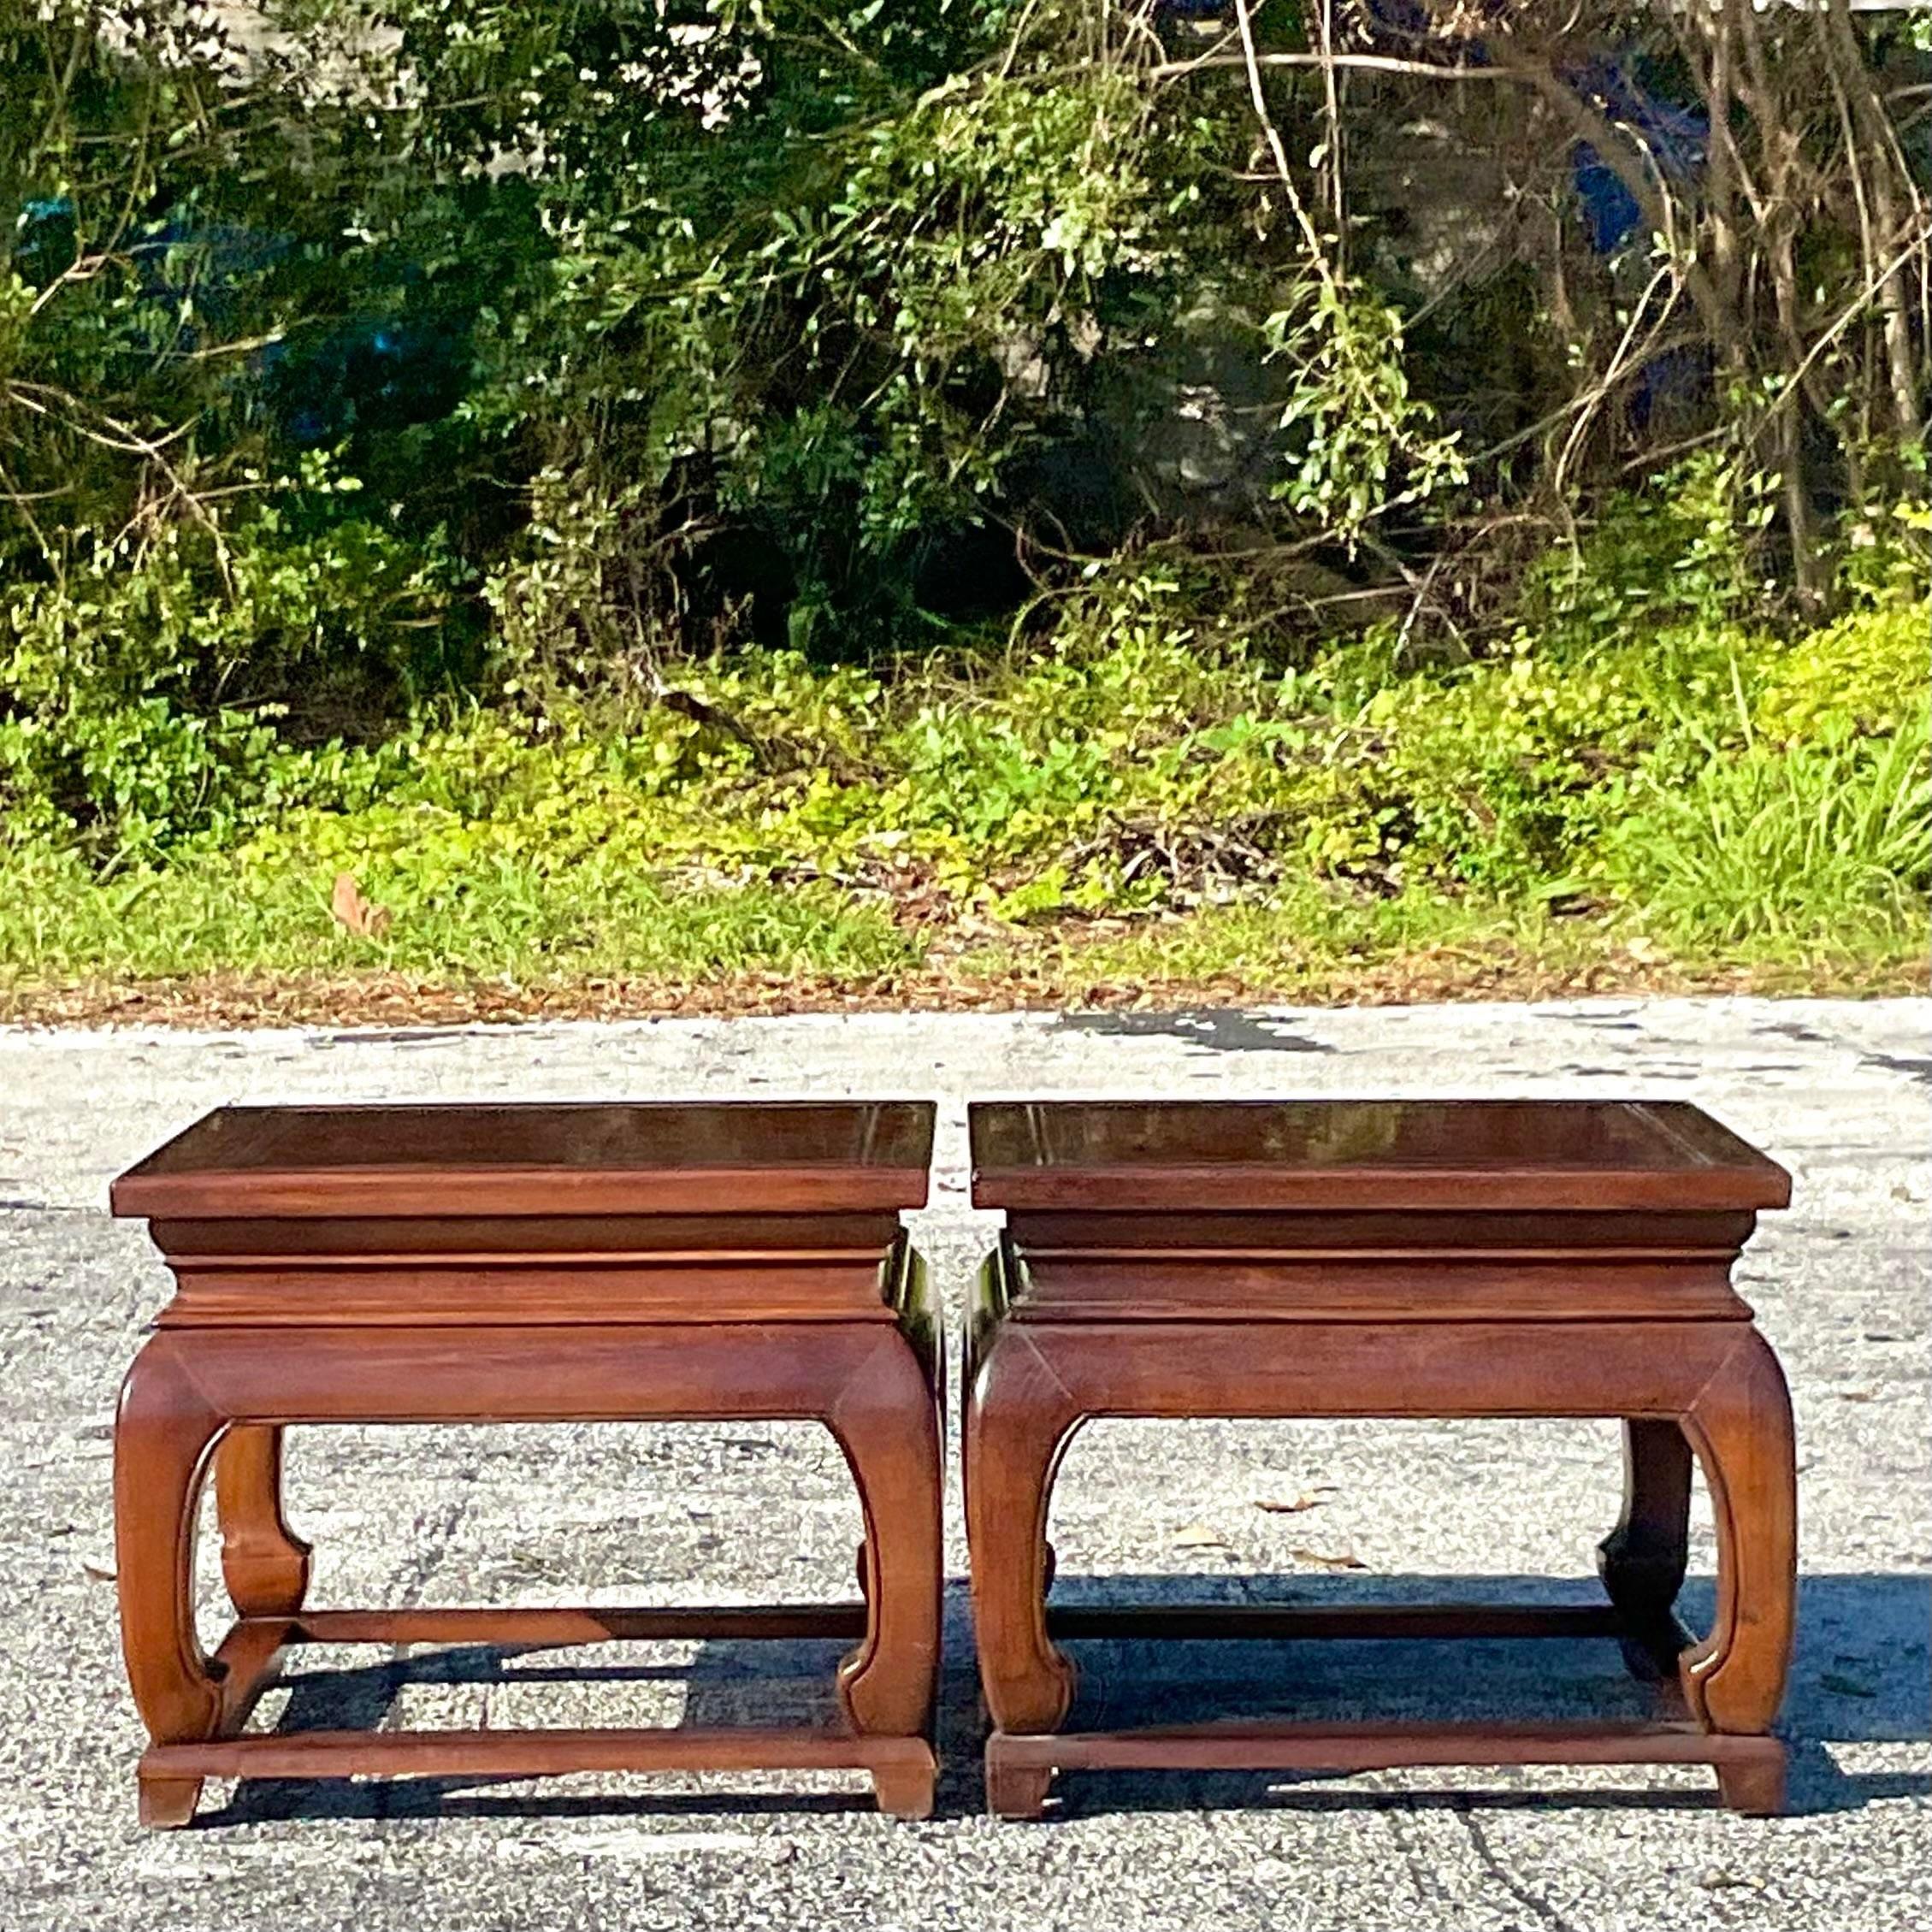 A fabulous pair of vintage Regency drinks tables. Made by the iconic Baker Furniture group and tagged on the bottom. A chic Burl wood construction with the classic Ming shape. Acquired from a Miami estate.